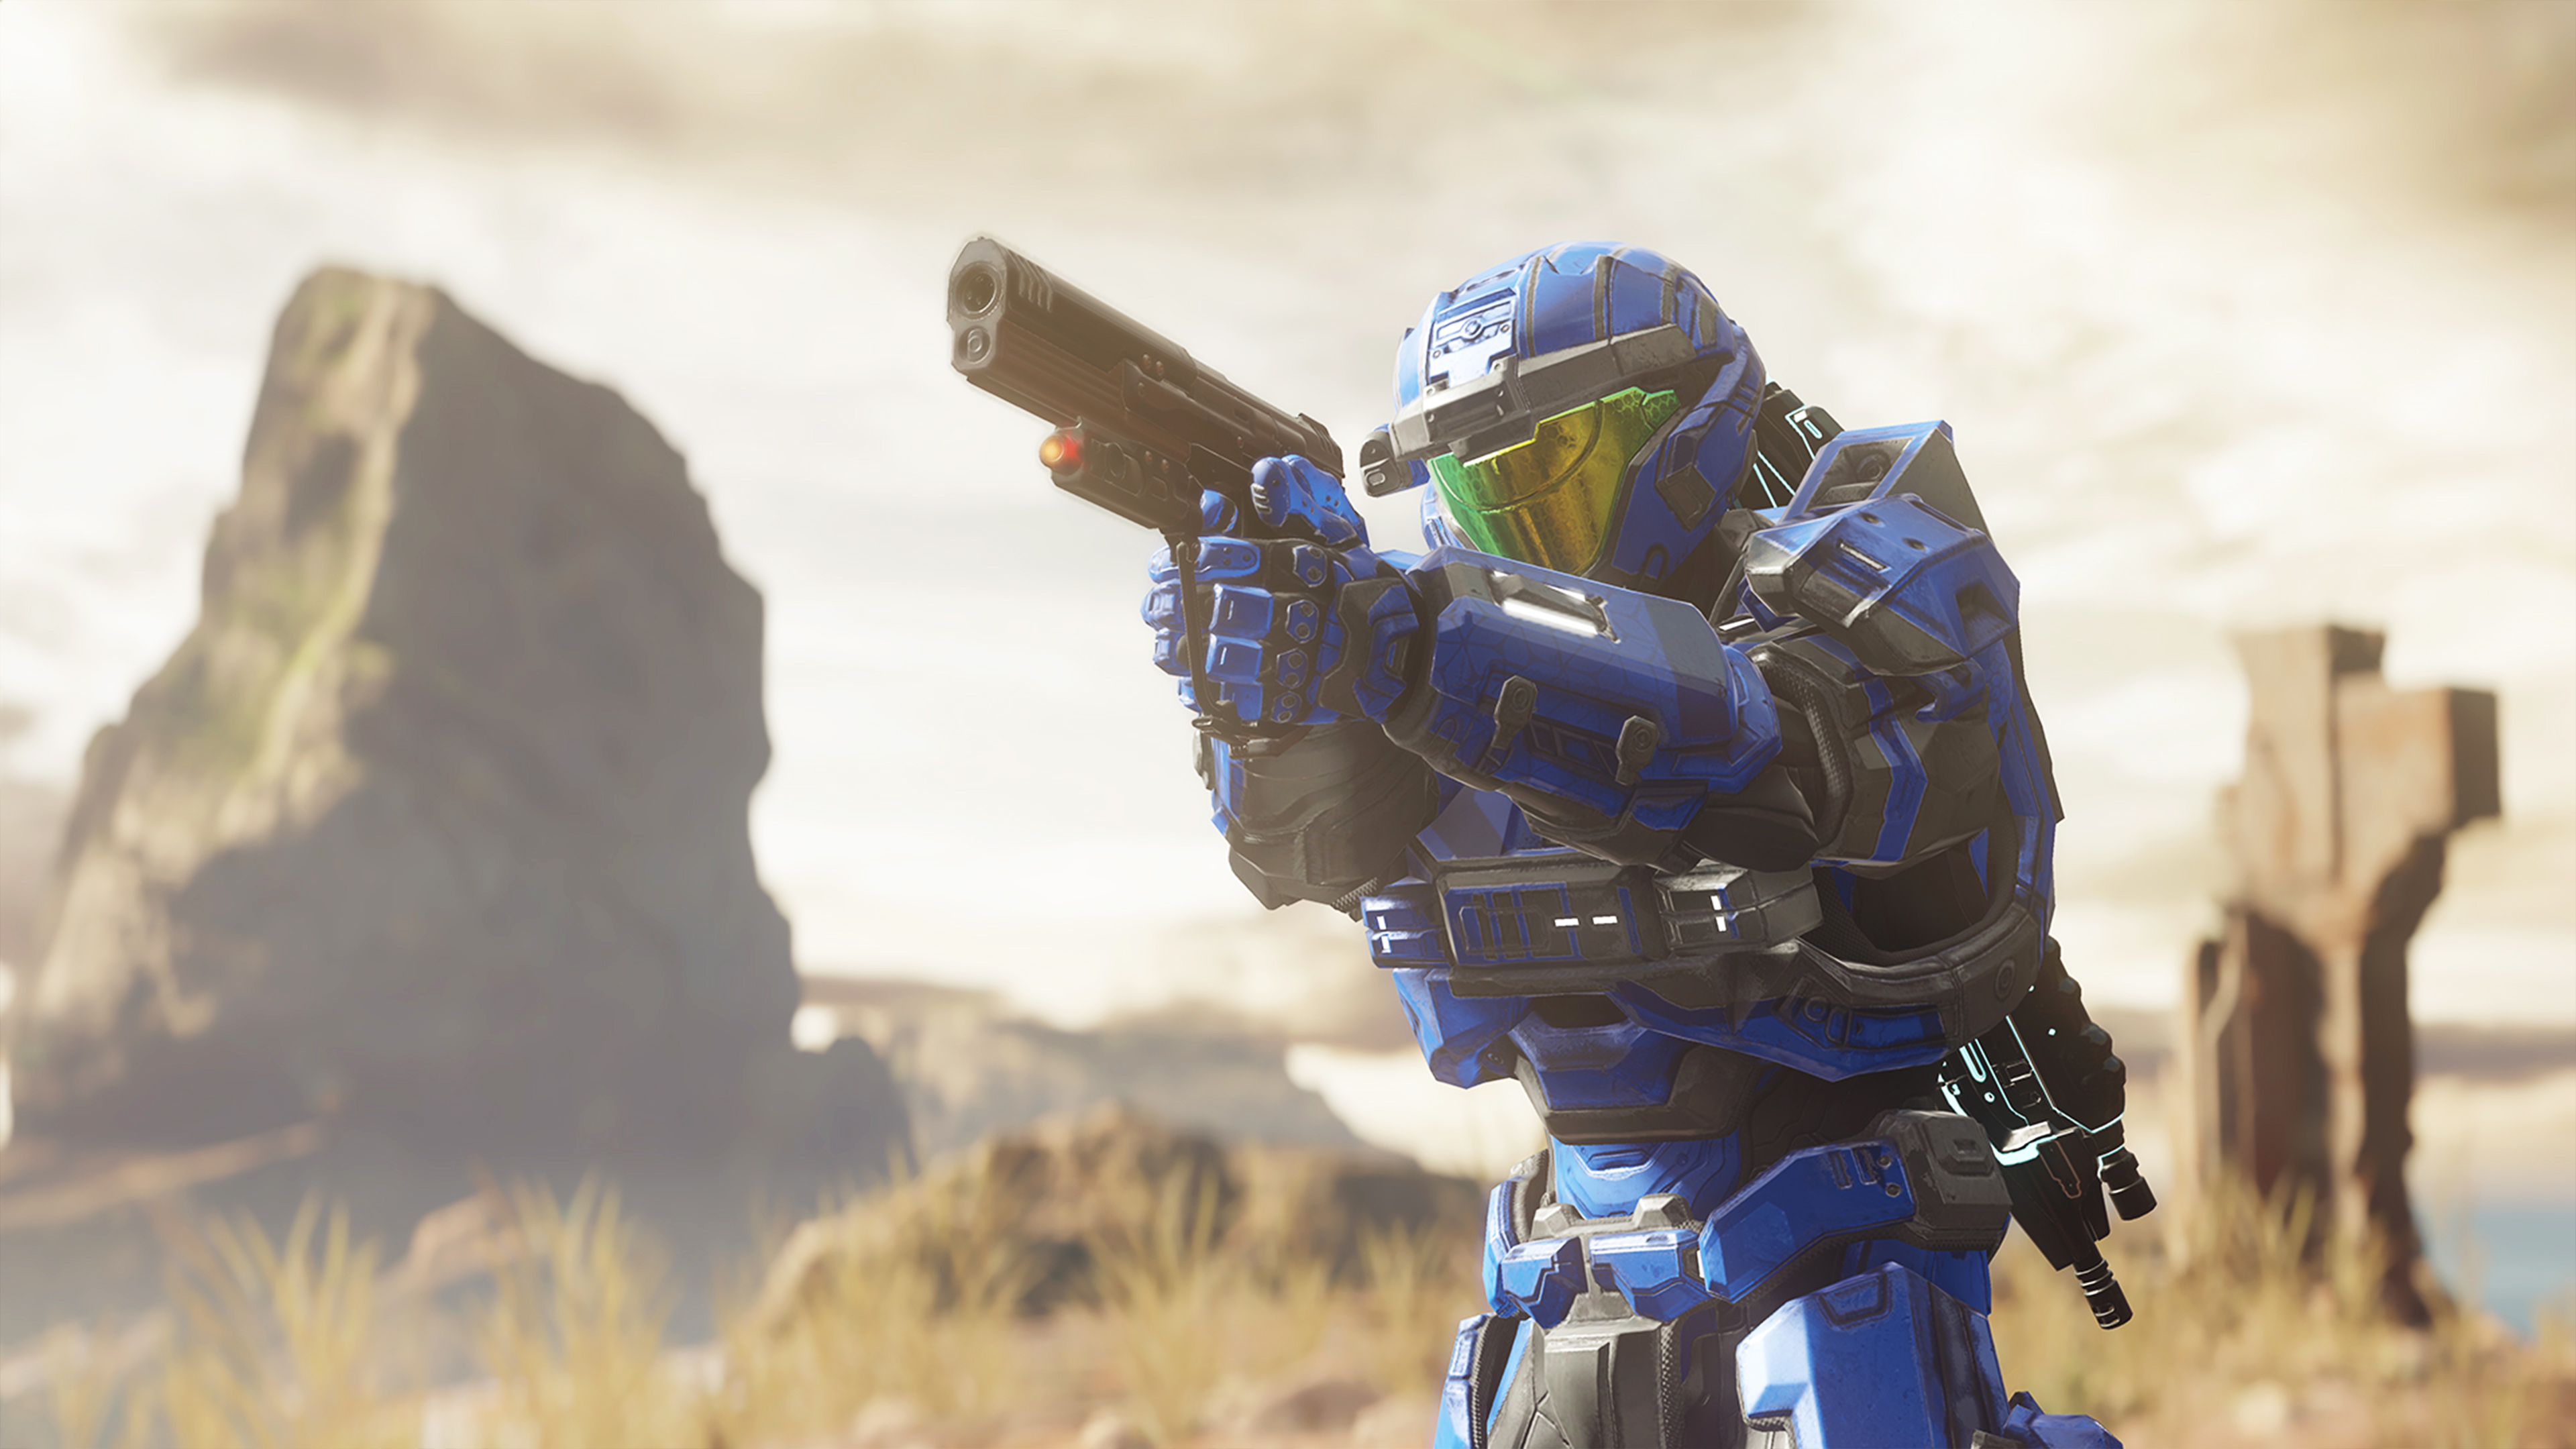 tmp_23462-Halo-5-Guardians-Warzone-Assault-Temple-Point-and-Shoot1567112409